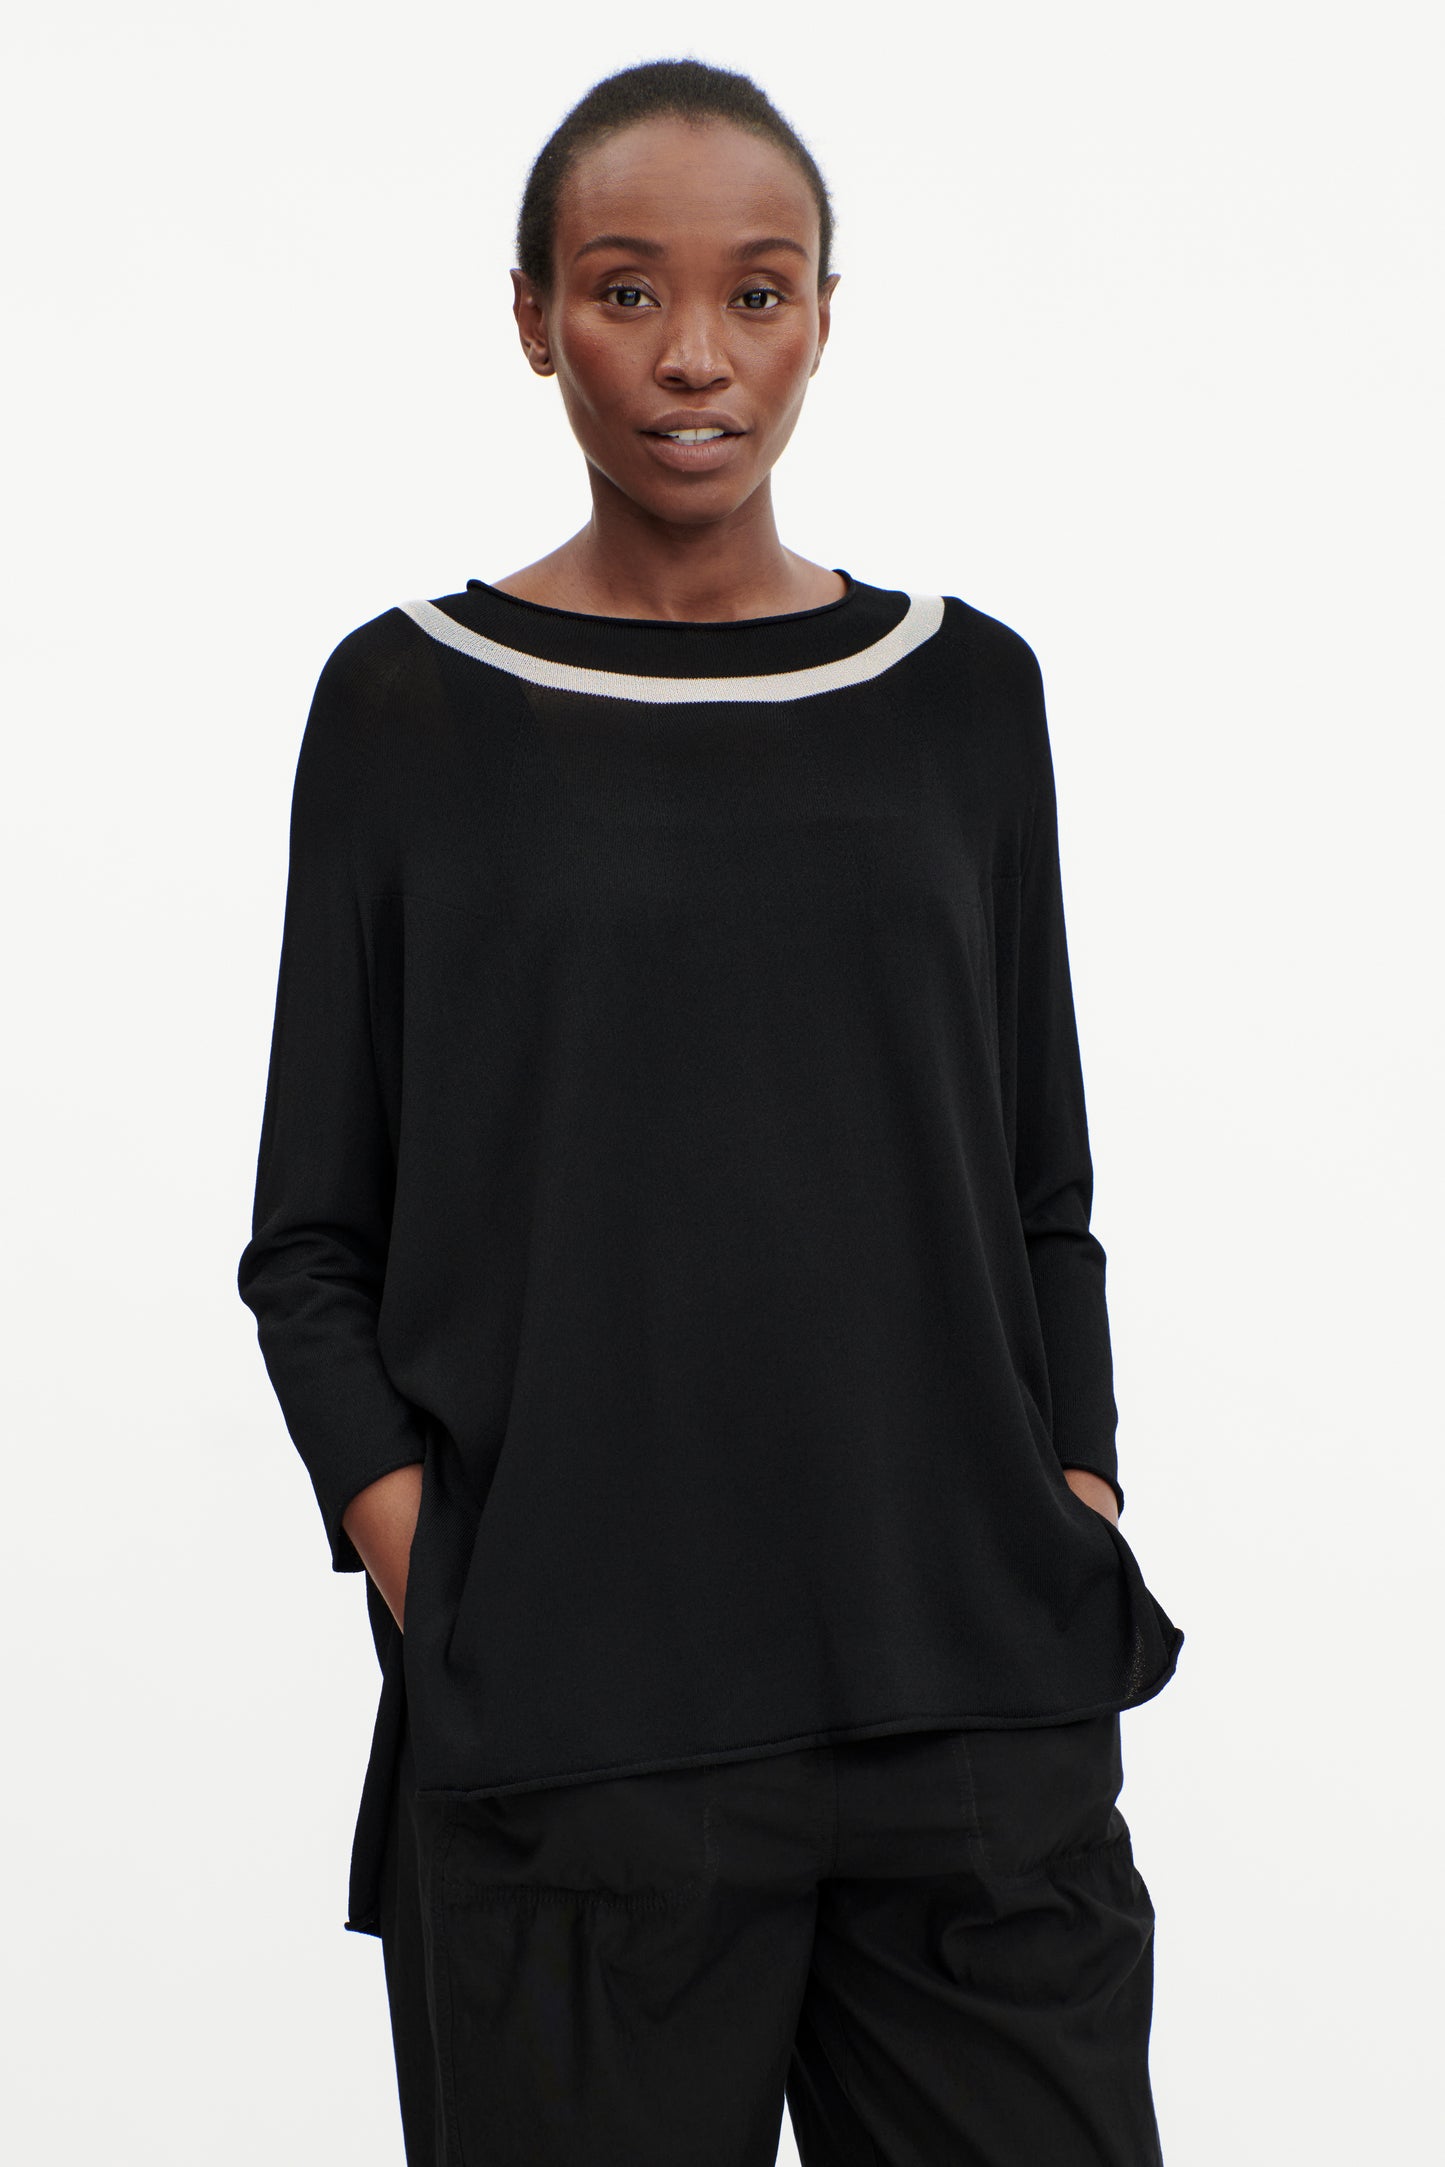 Wink Black Top With Neck detail